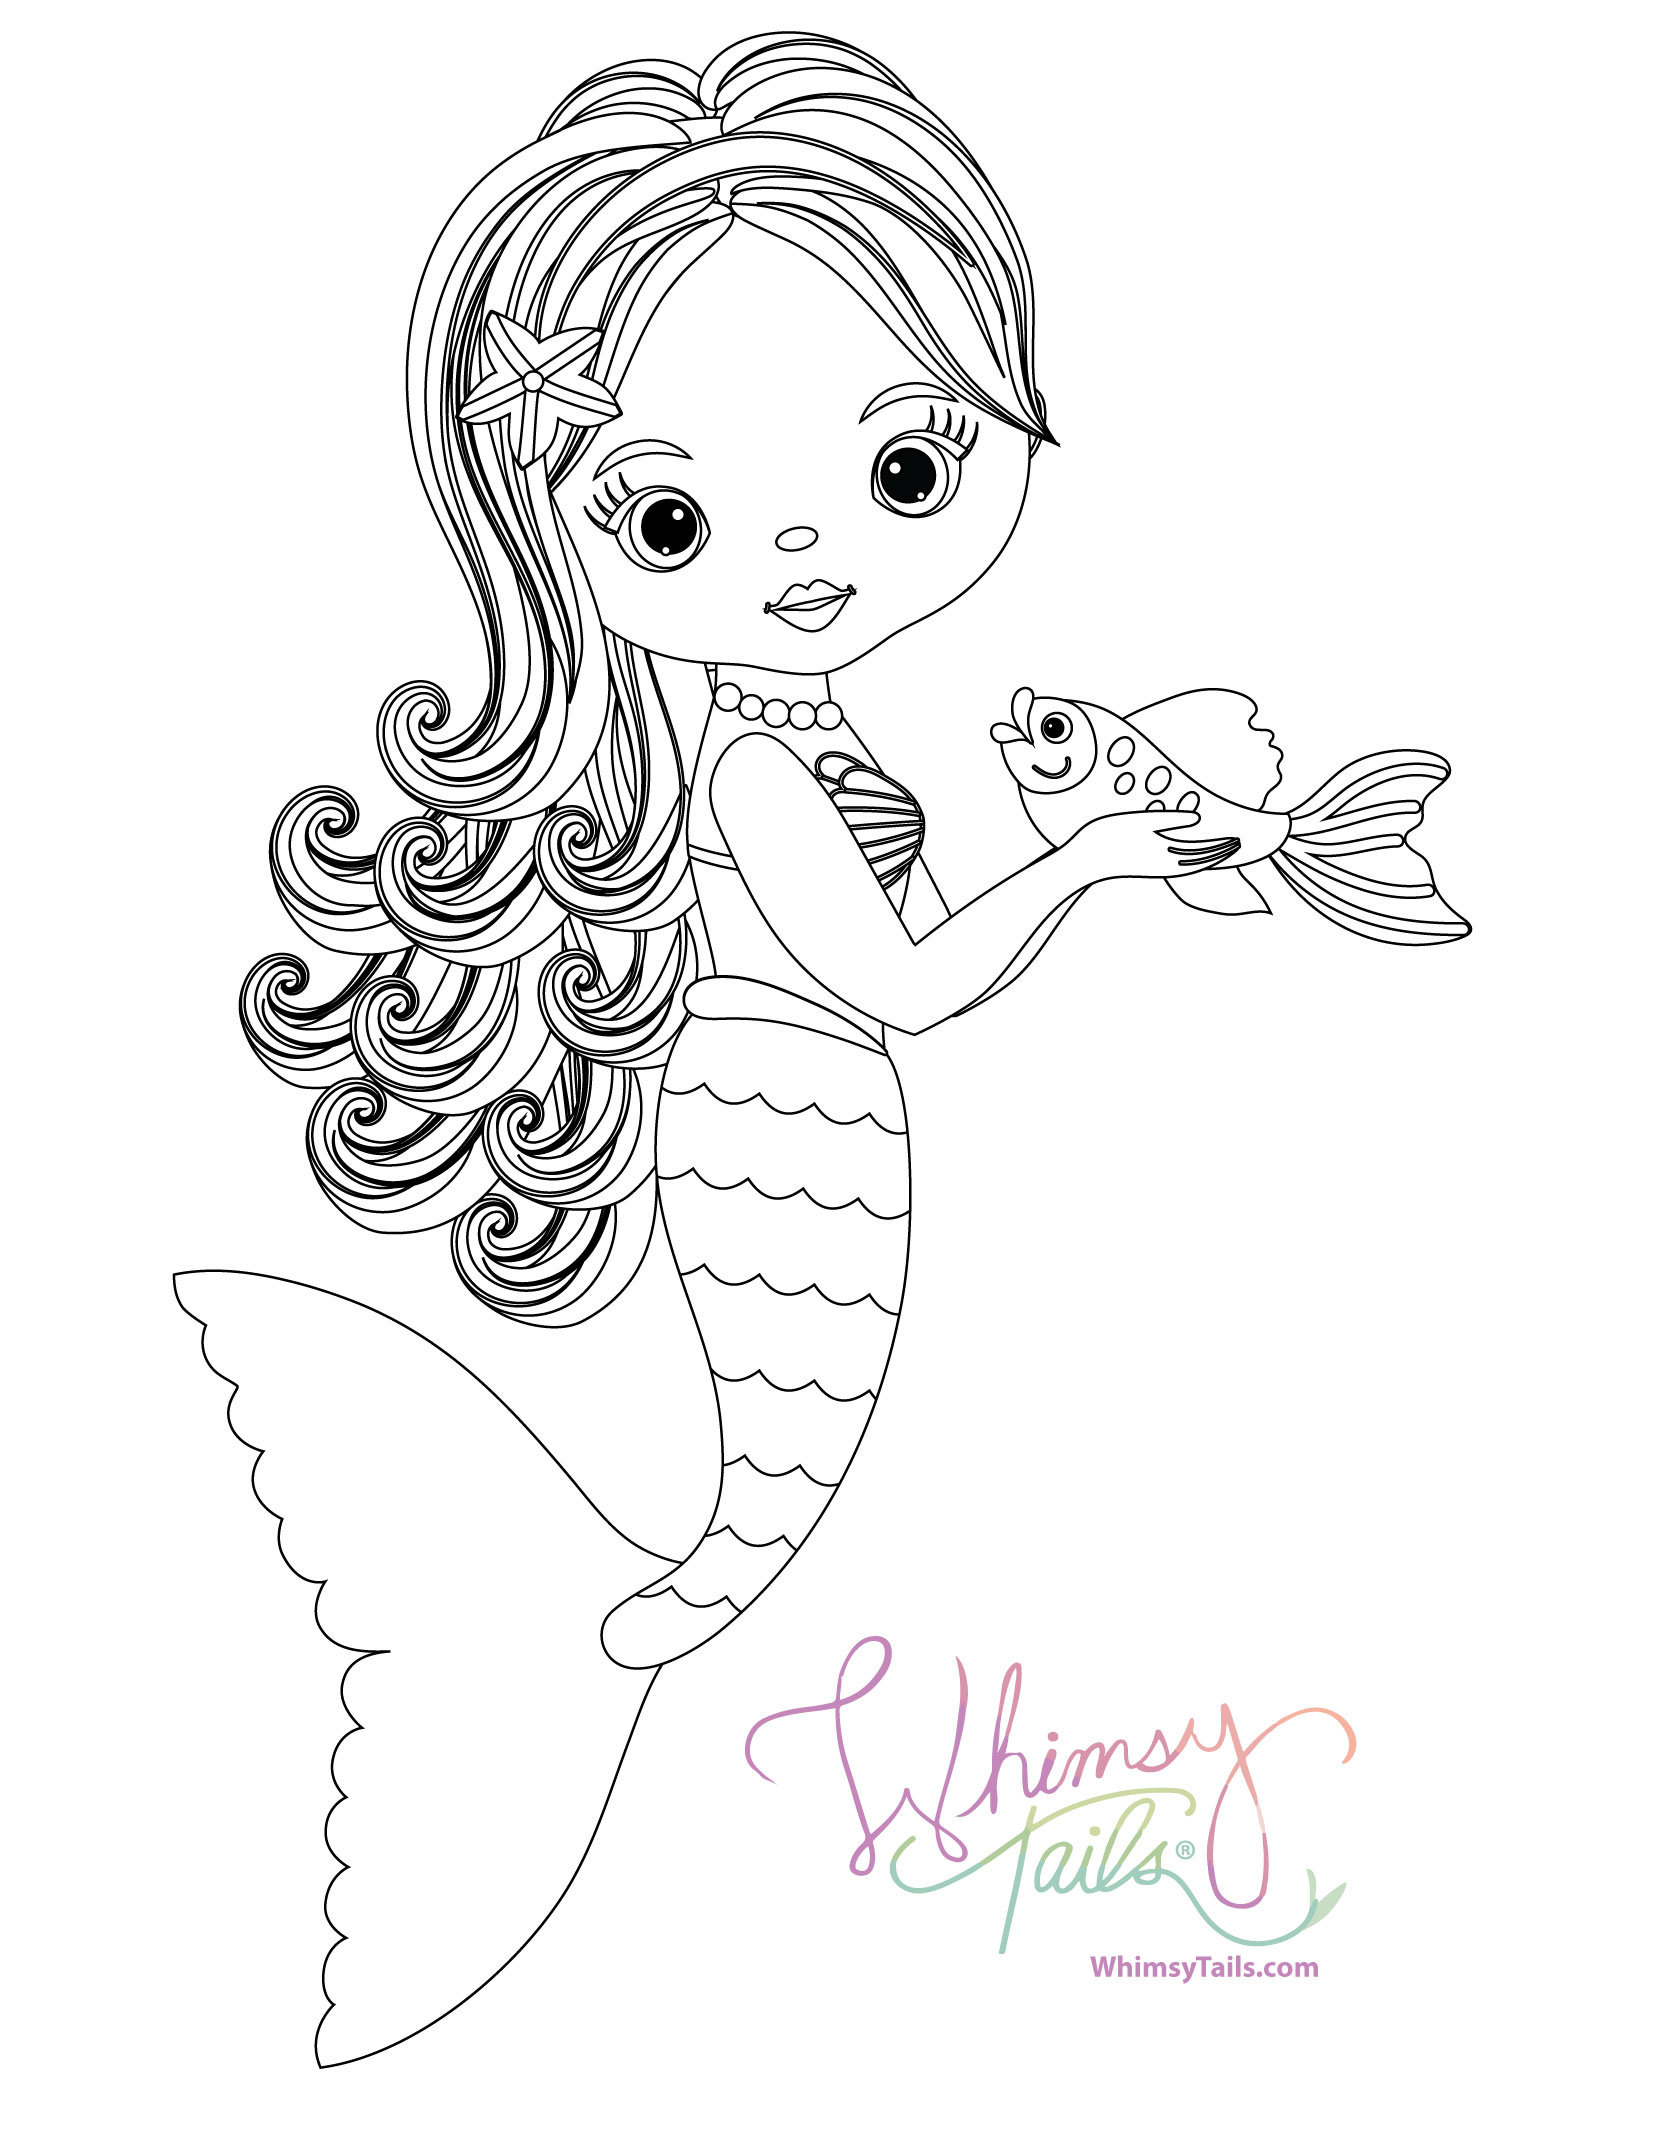 Free Mermaid Tail Coloring Pages / Simple Mermaid Drawing Tail Coloring